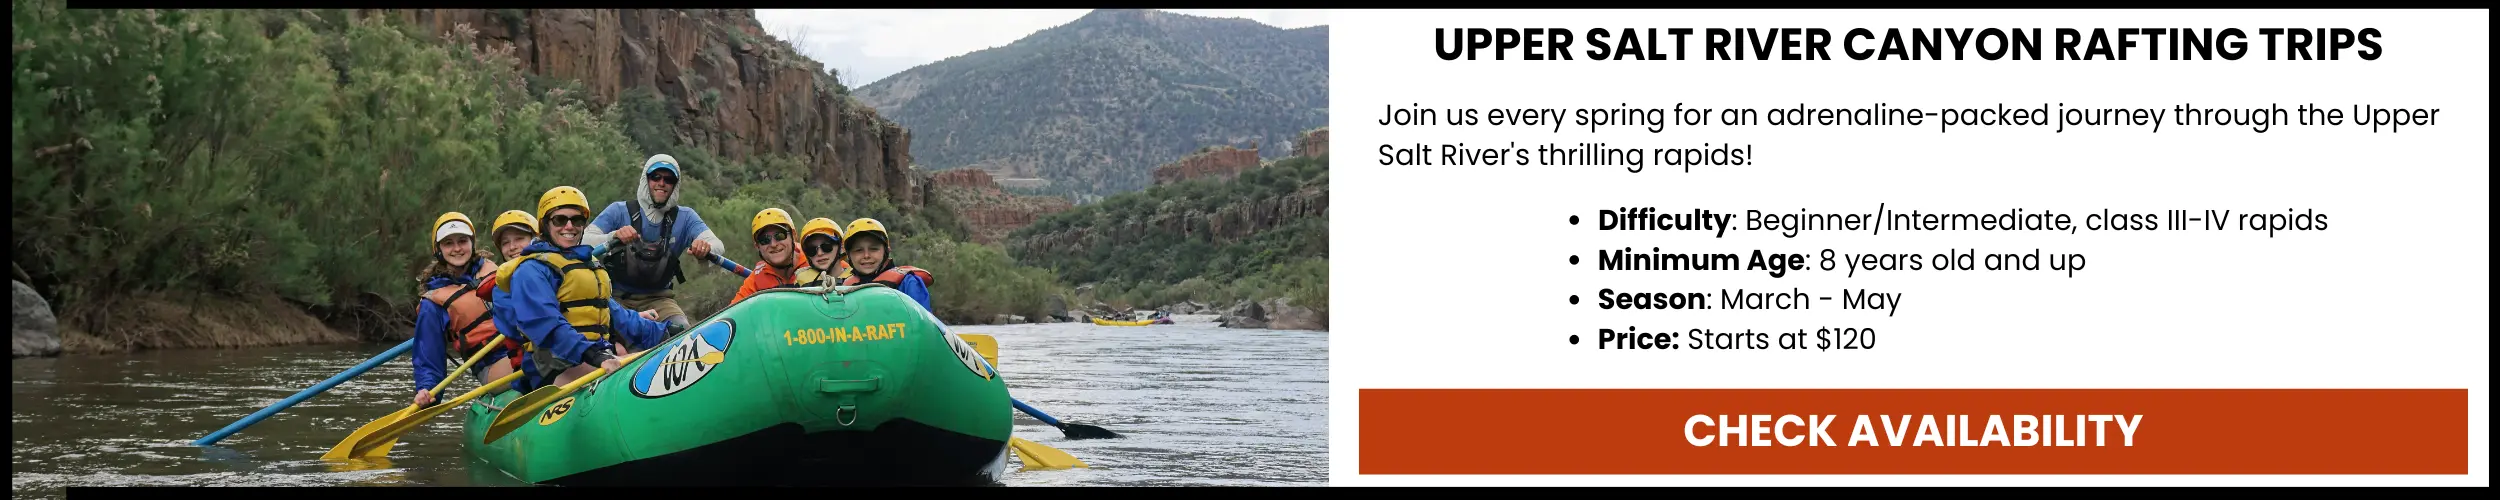 an advertisement for rafting the salt river